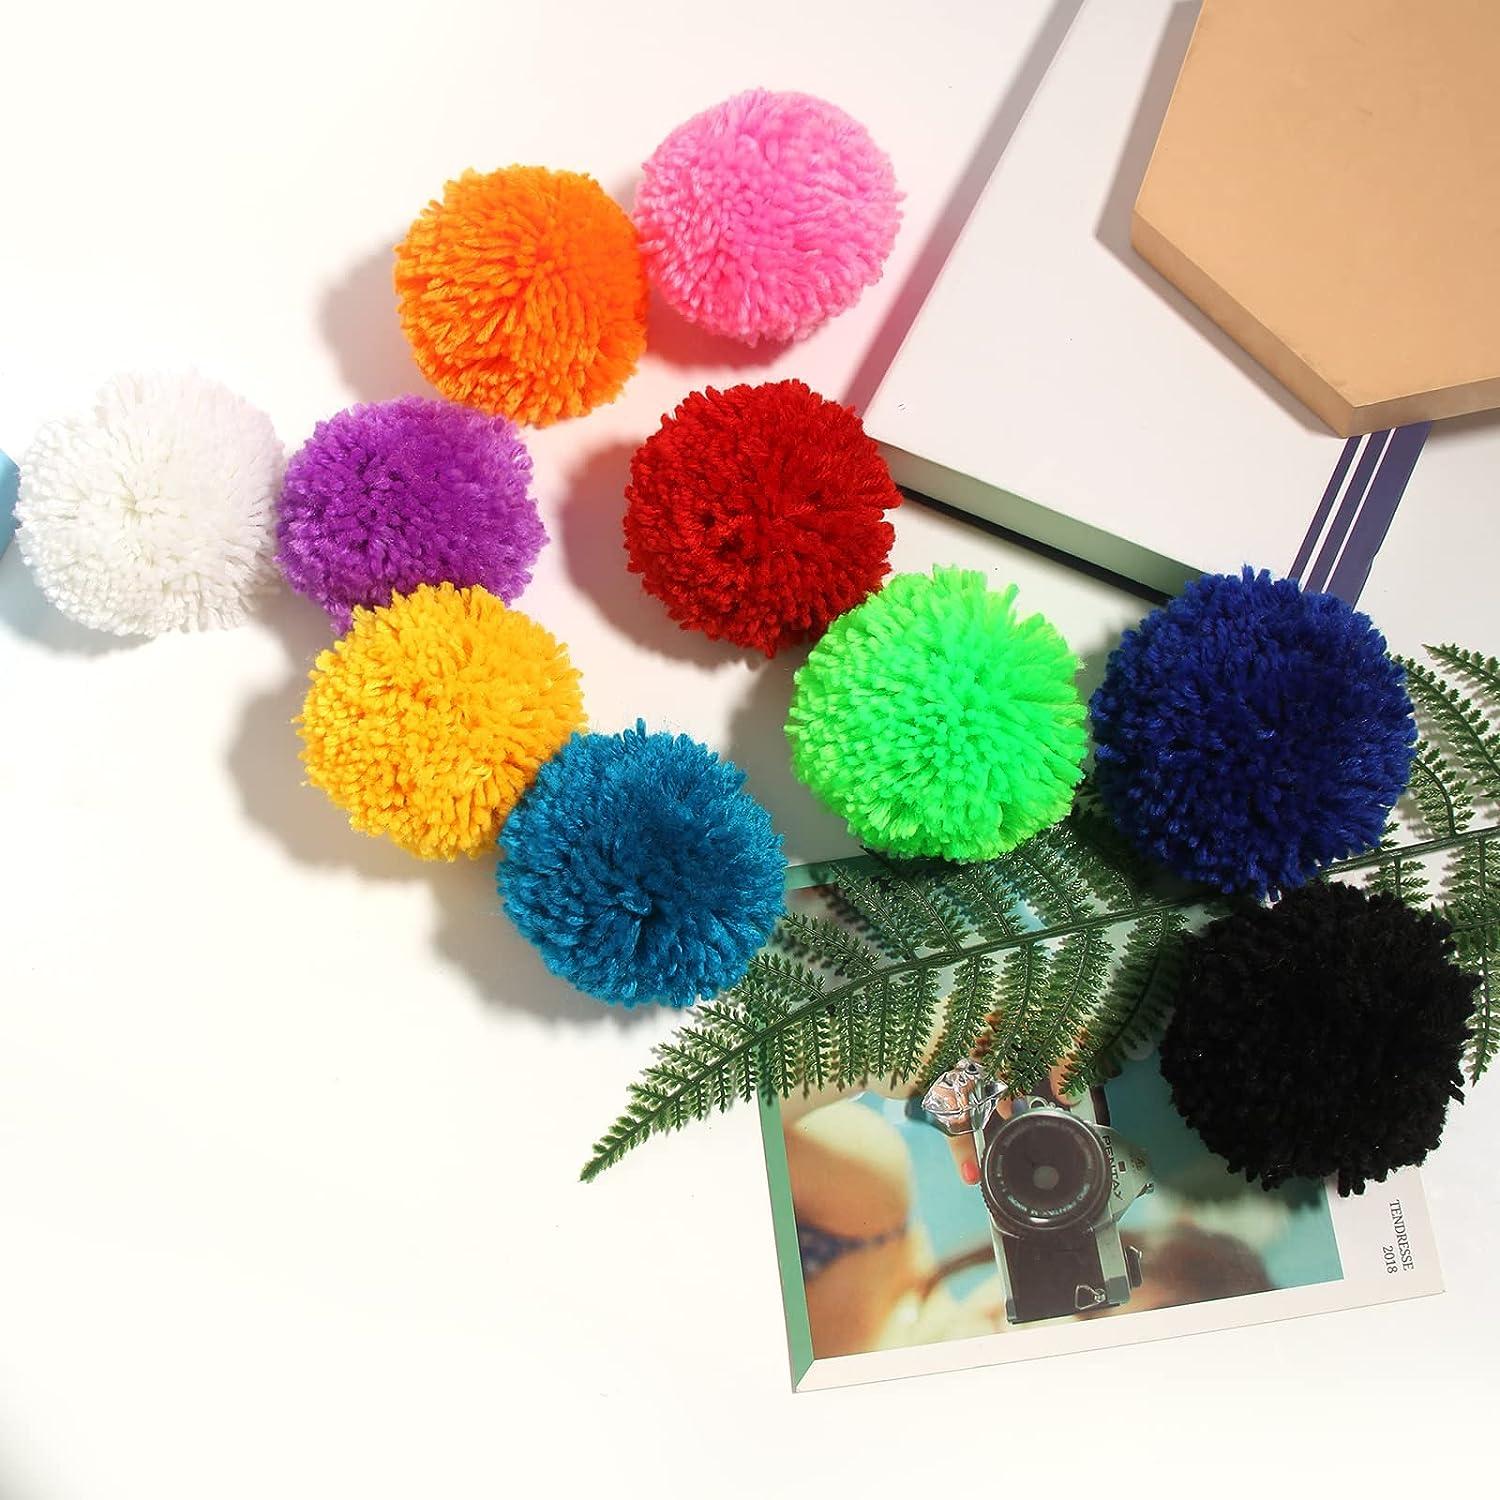 100pcs 25mm Cotton Yarn Mini Pompoms For Crafts And Jewelry Making